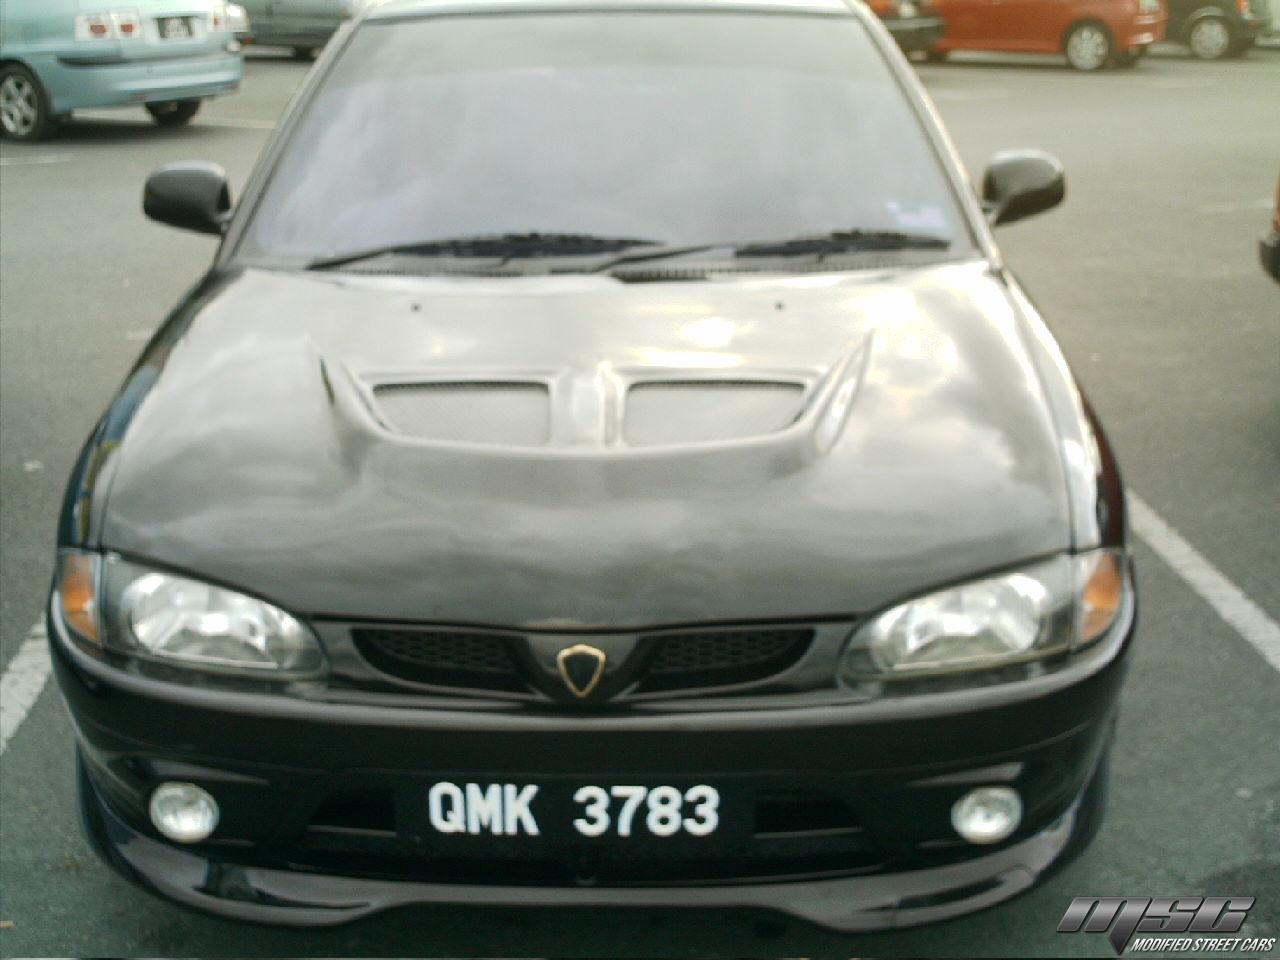 Proton Wira Aeroback 1.5 Manual pictures & info | Modified Street Cars